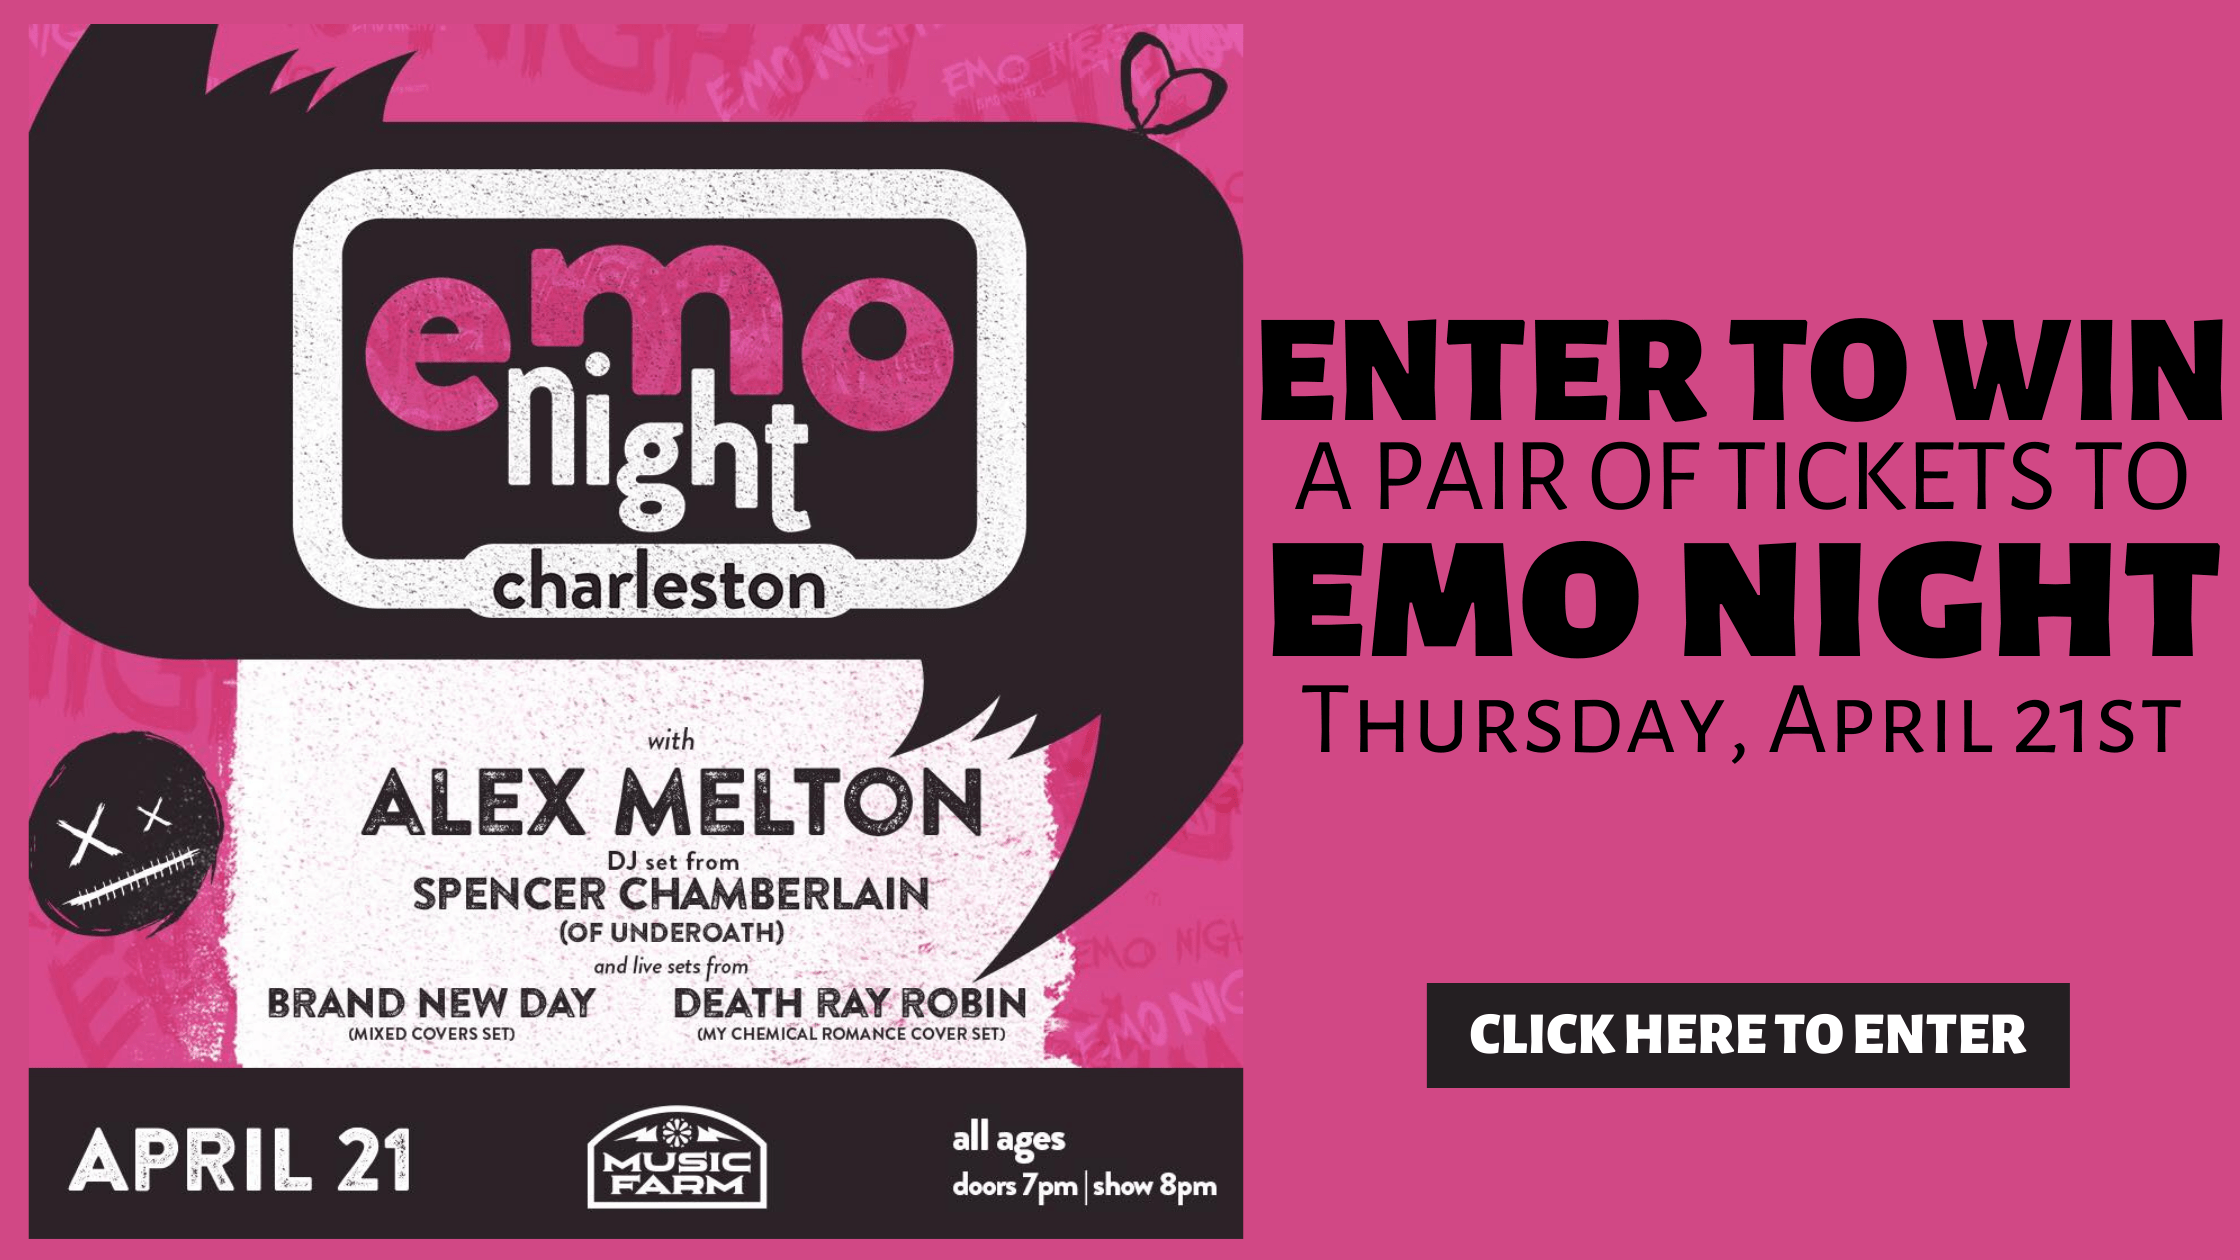 emo-night-enter-to-win-hp-banner